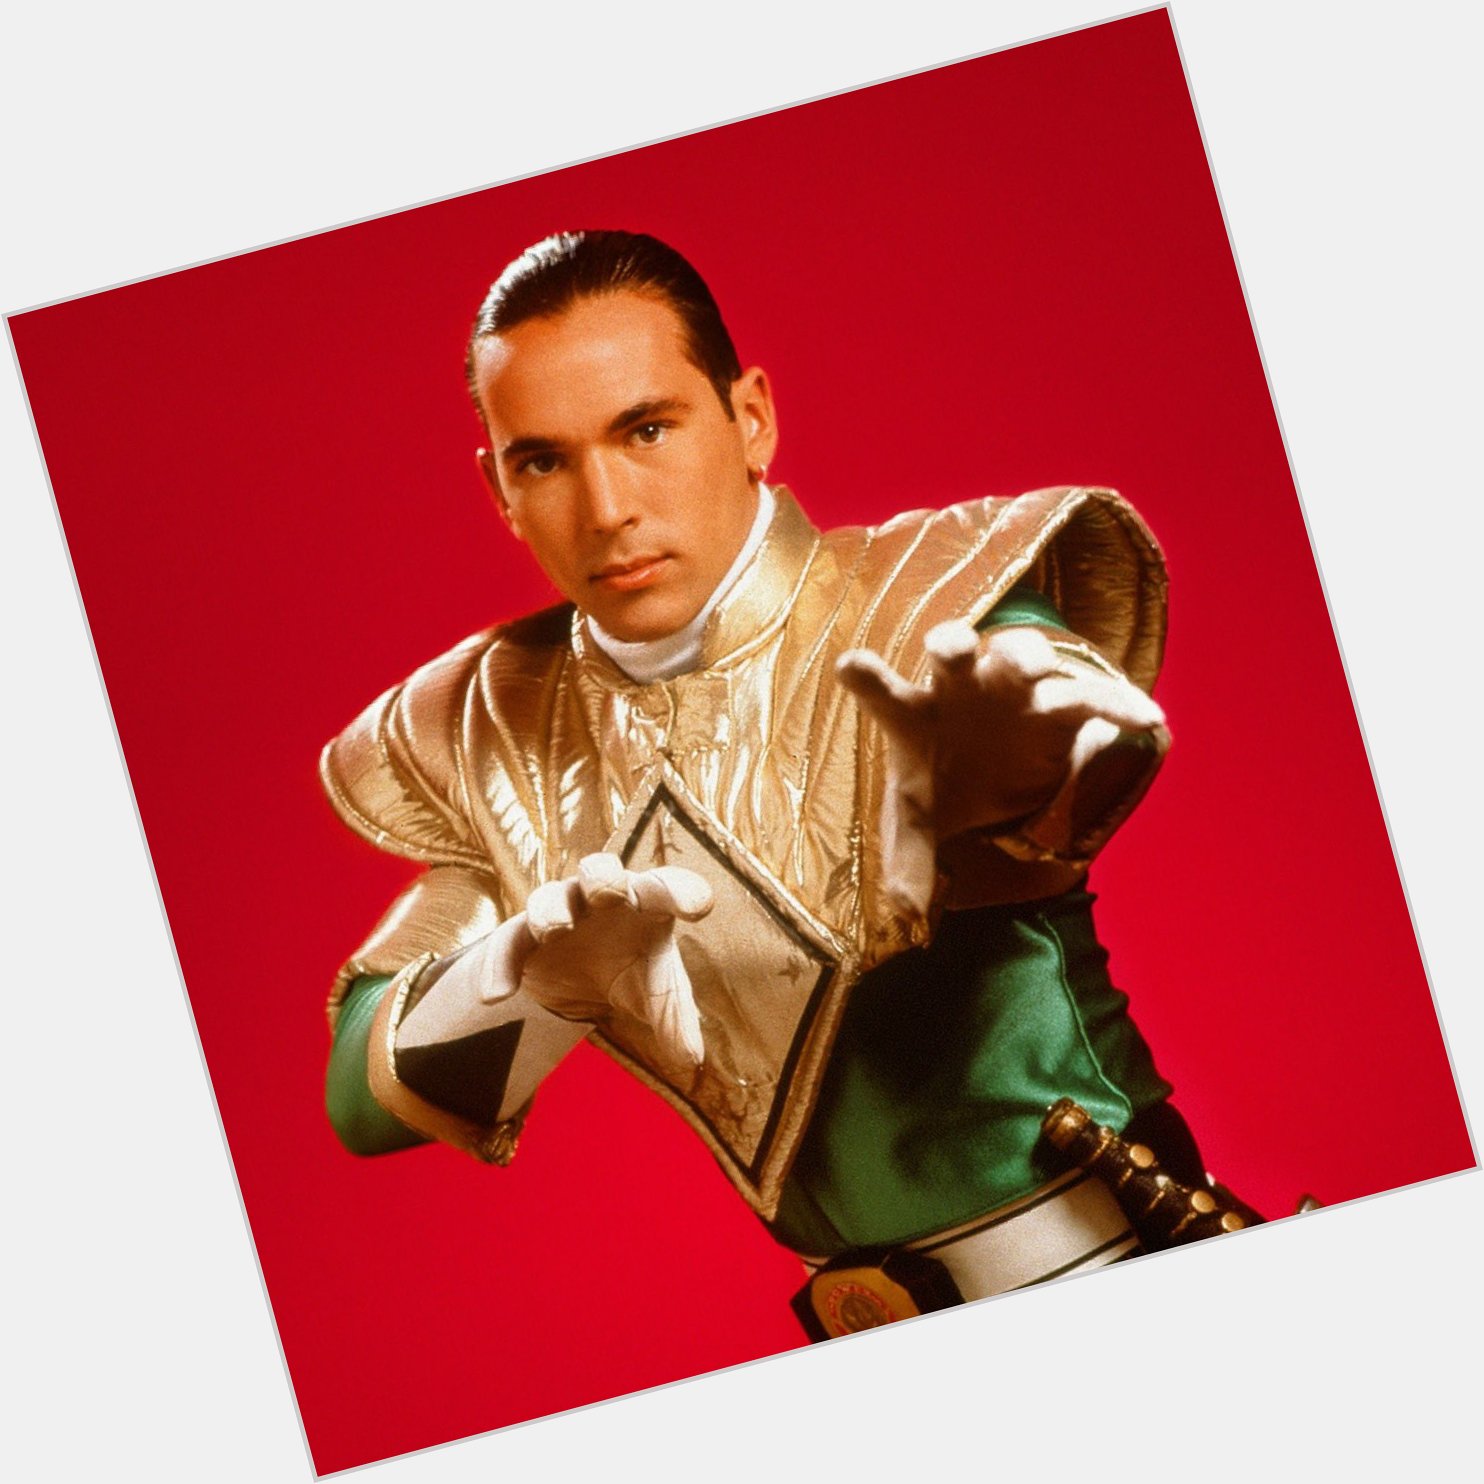 Happy birthday to the one and only Jason David Frank! 